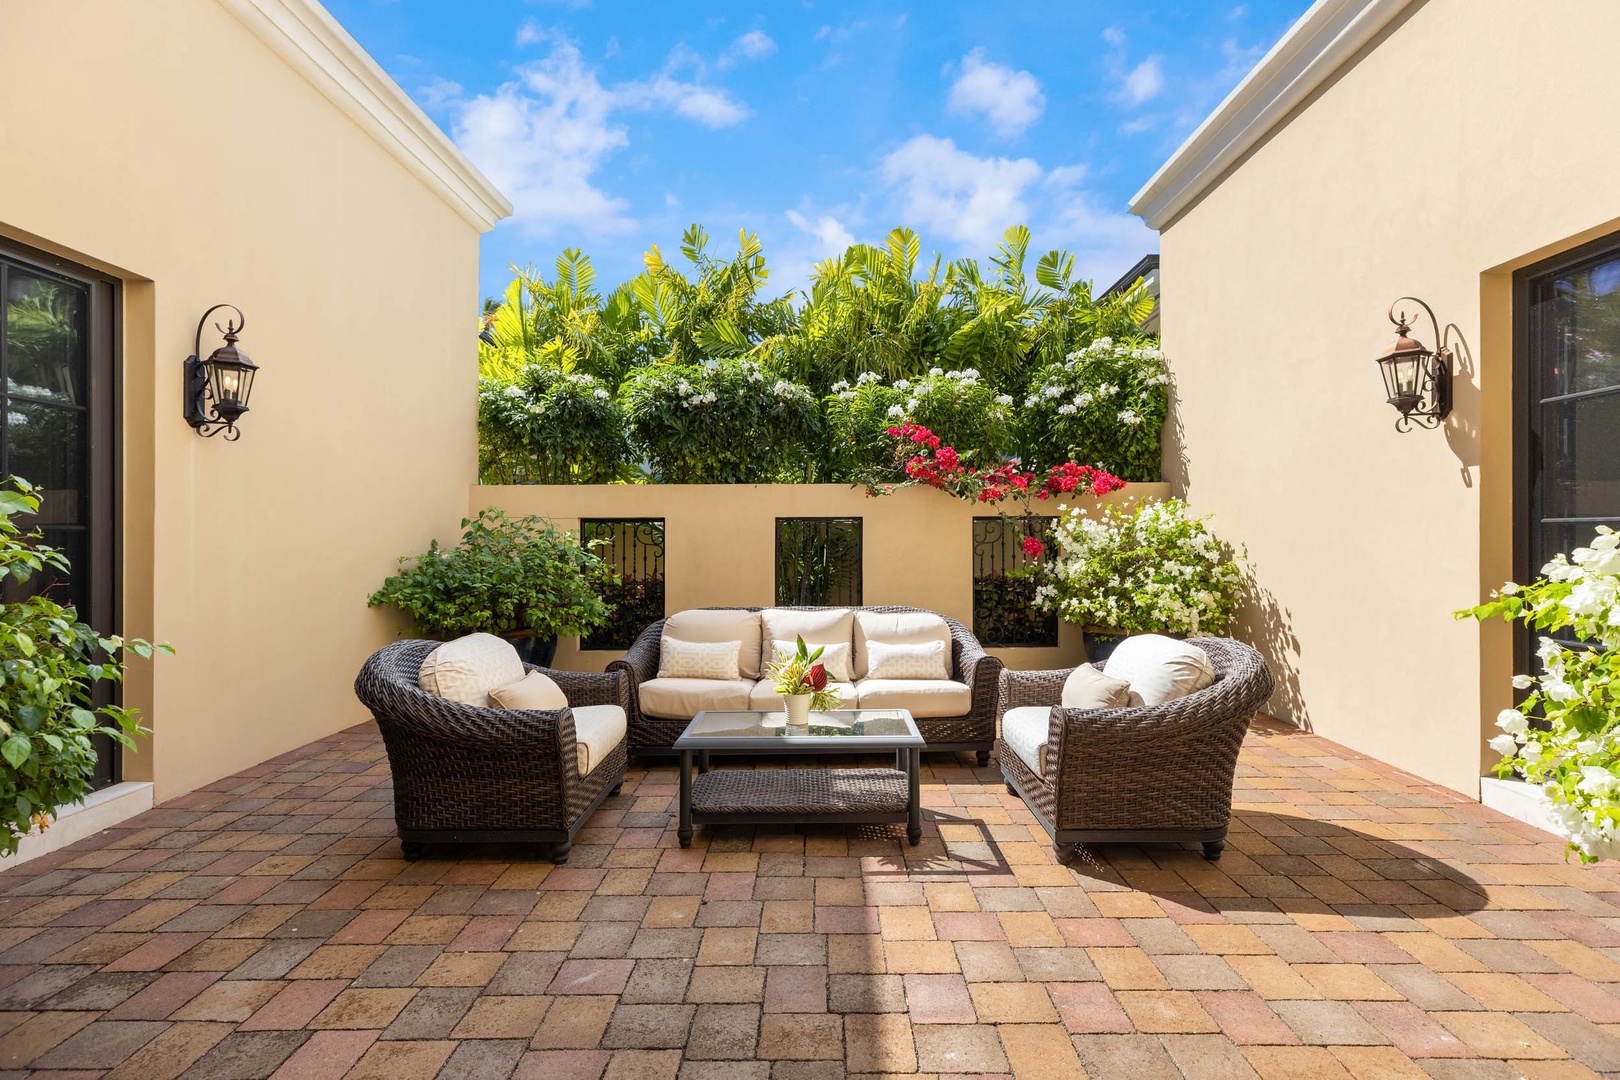 Honolulu Vacation Rentals, The Kahala Mansion - Lounge area right off the courtyard.